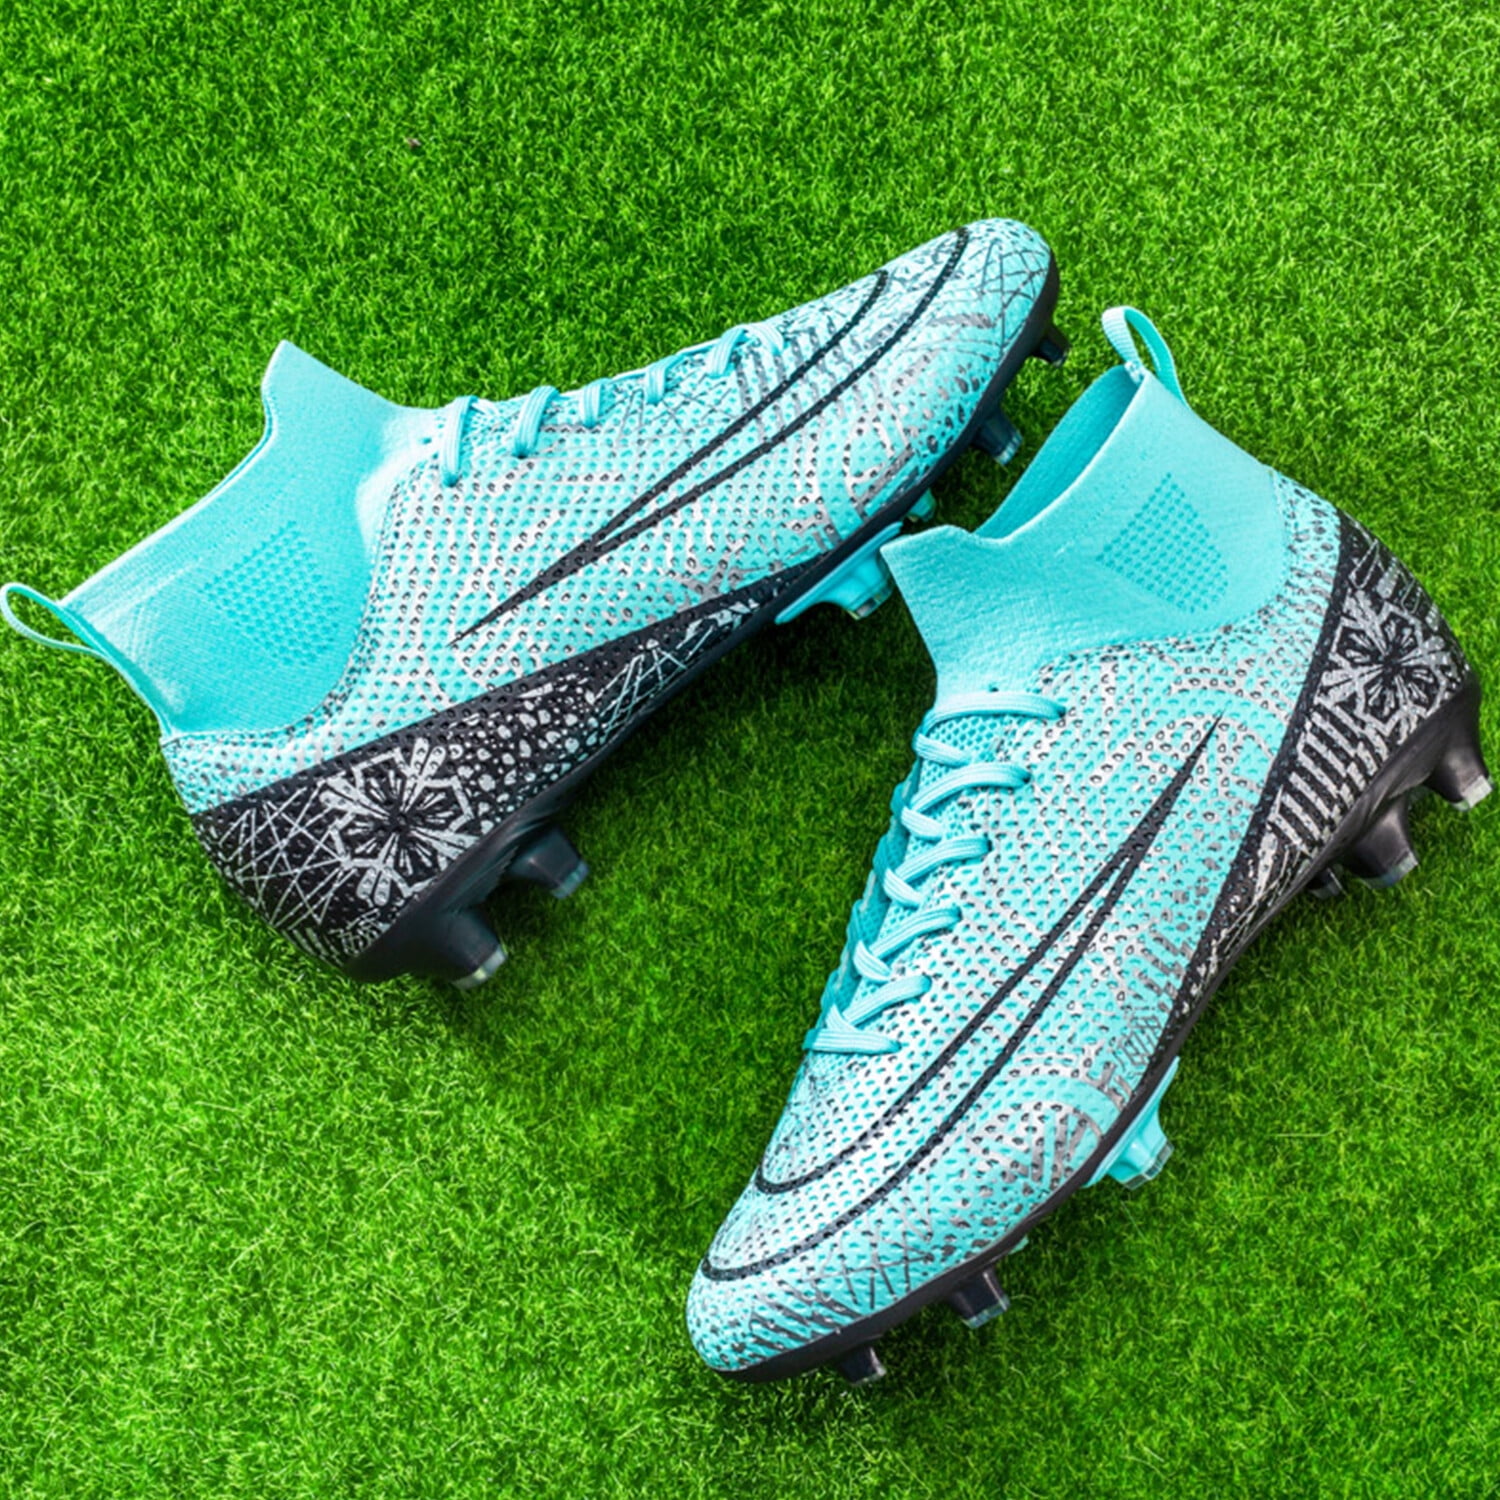 How To Pick the Right Indoor Soccer Shoe for You. Nike.com